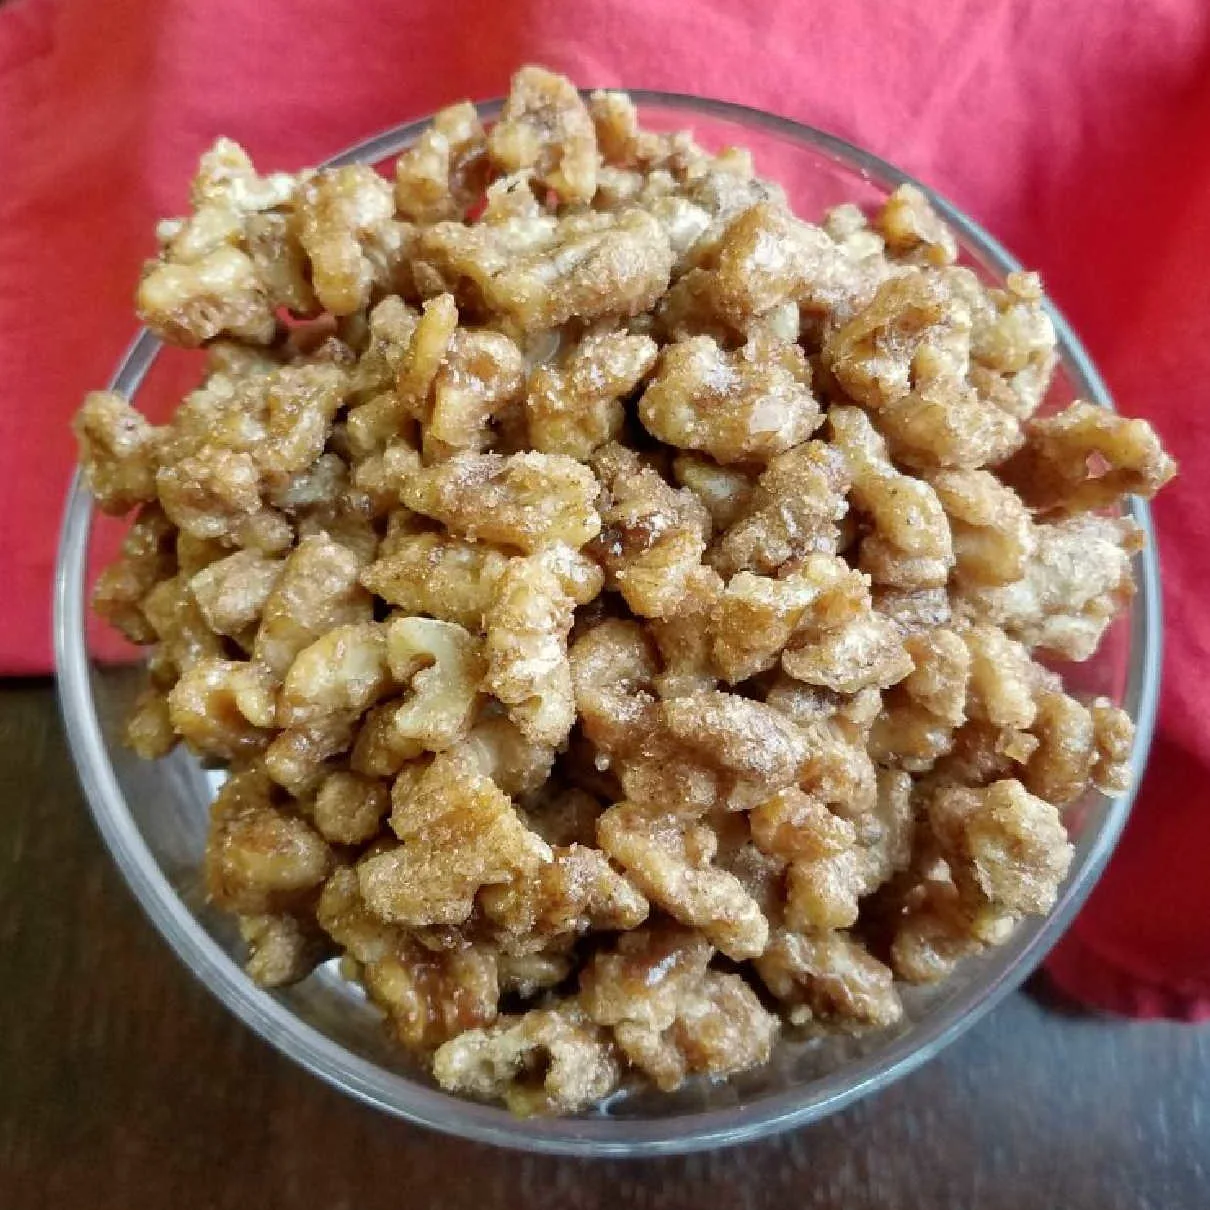 bowl full of candied walnuts with cinnamon and spices on them.